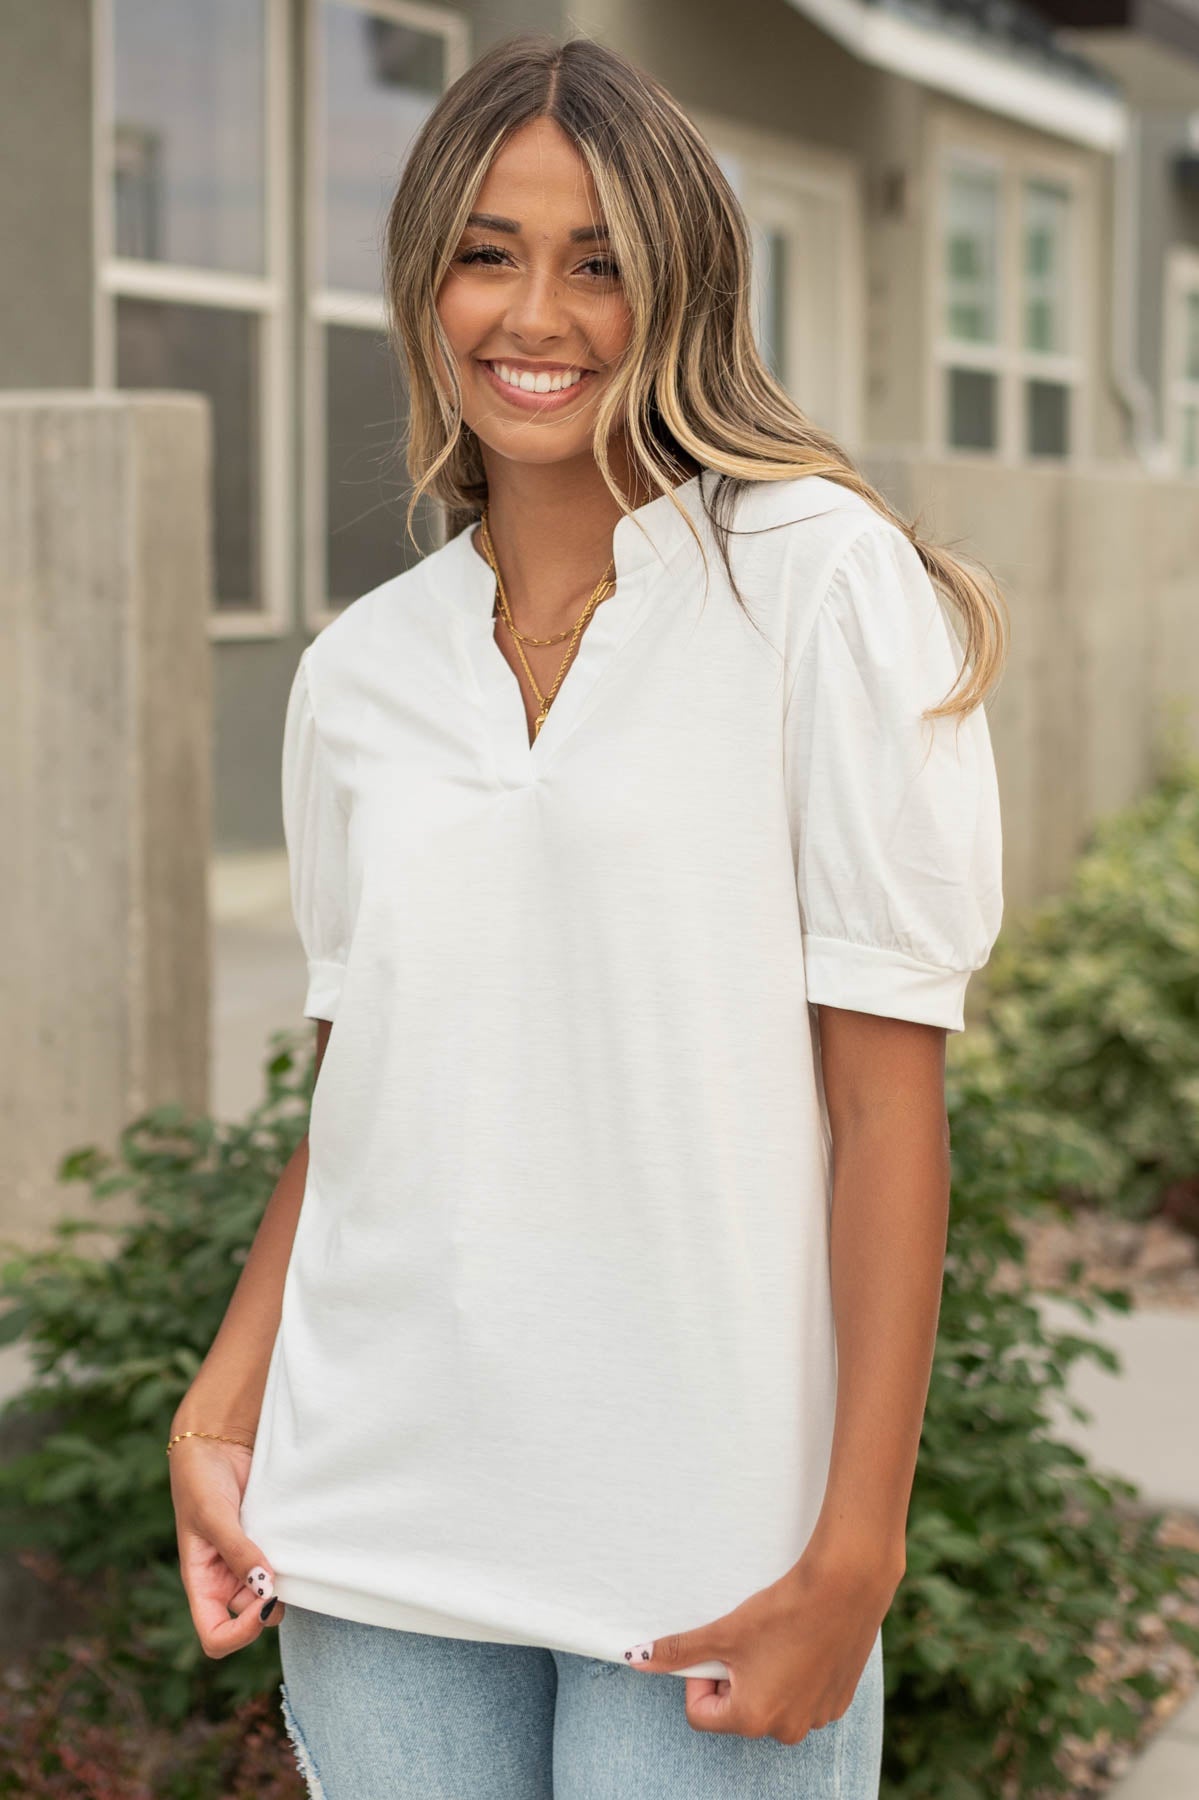 Rosa white top with v-neck opening